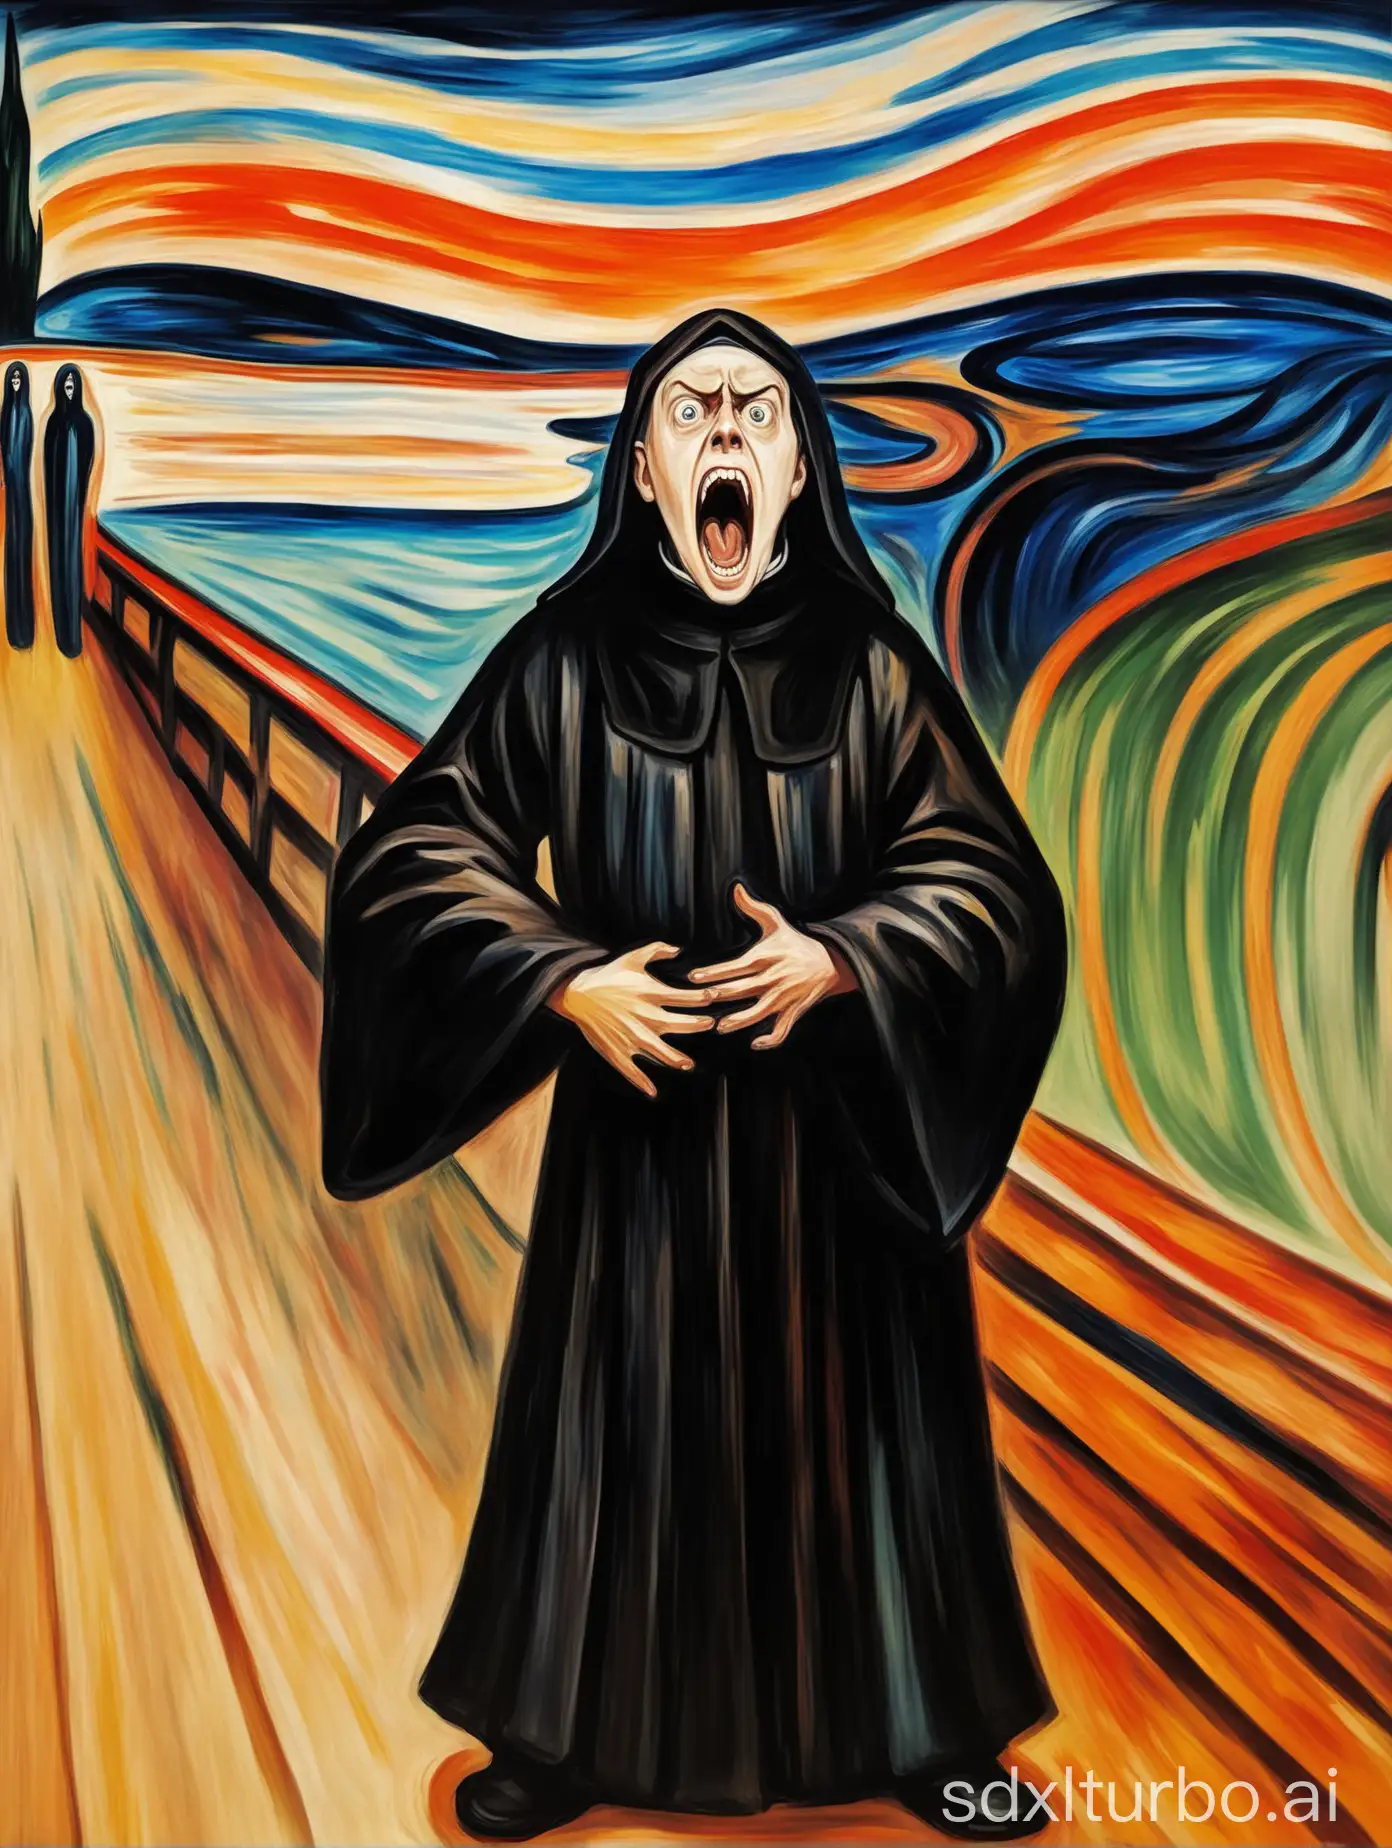 Renaissance-Friar-Screaming-in-Stylized-Oil-Painting